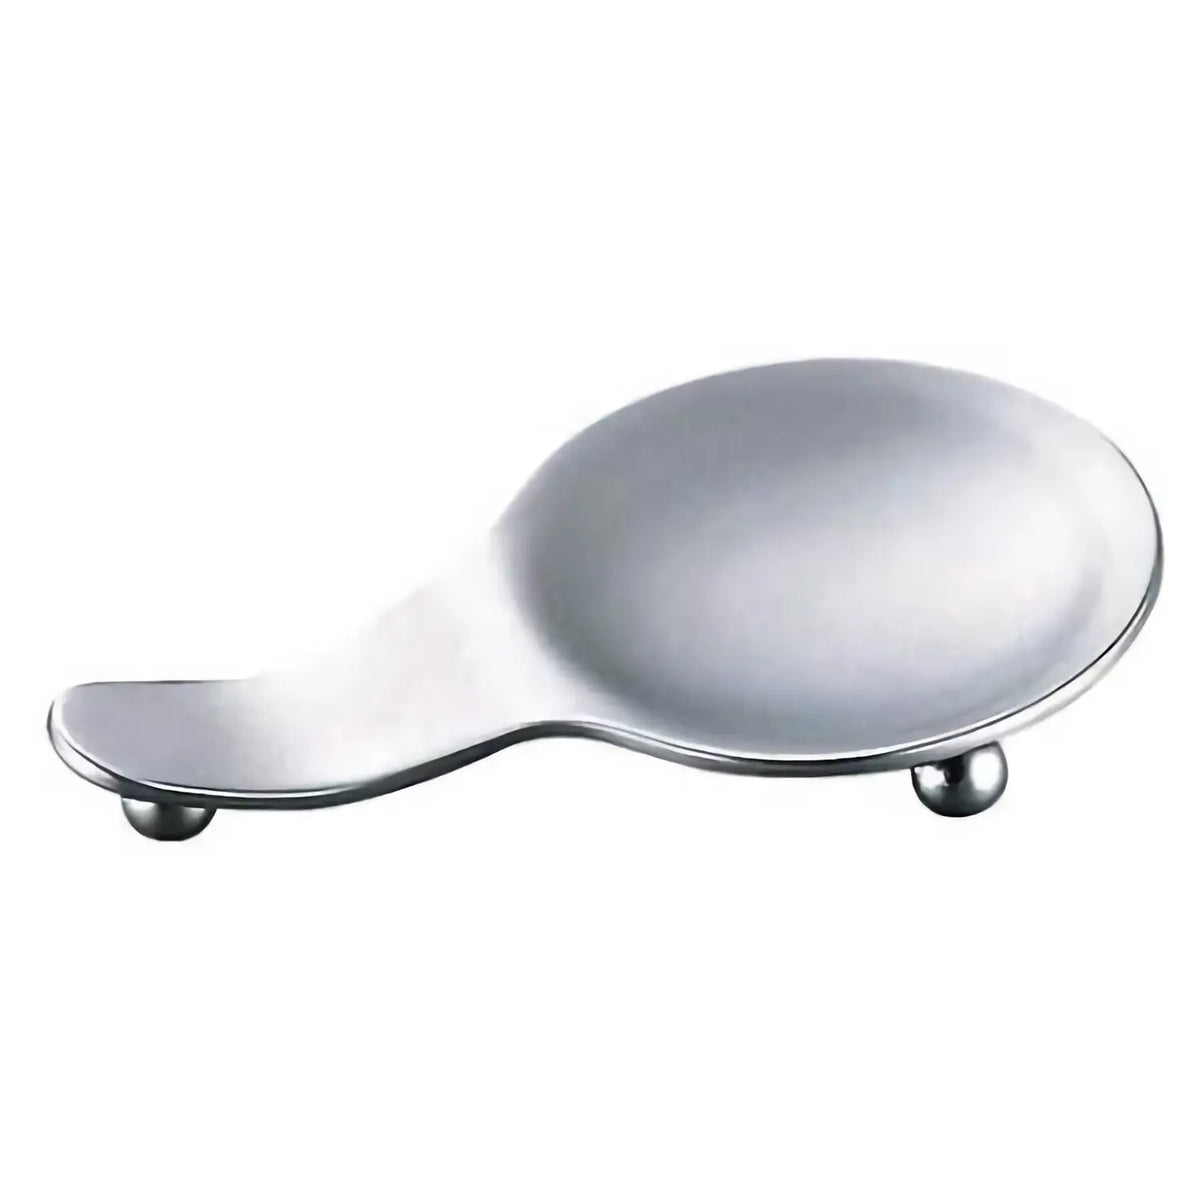 EBM Stainless Steel Chopstick and Renge Spoon Rest